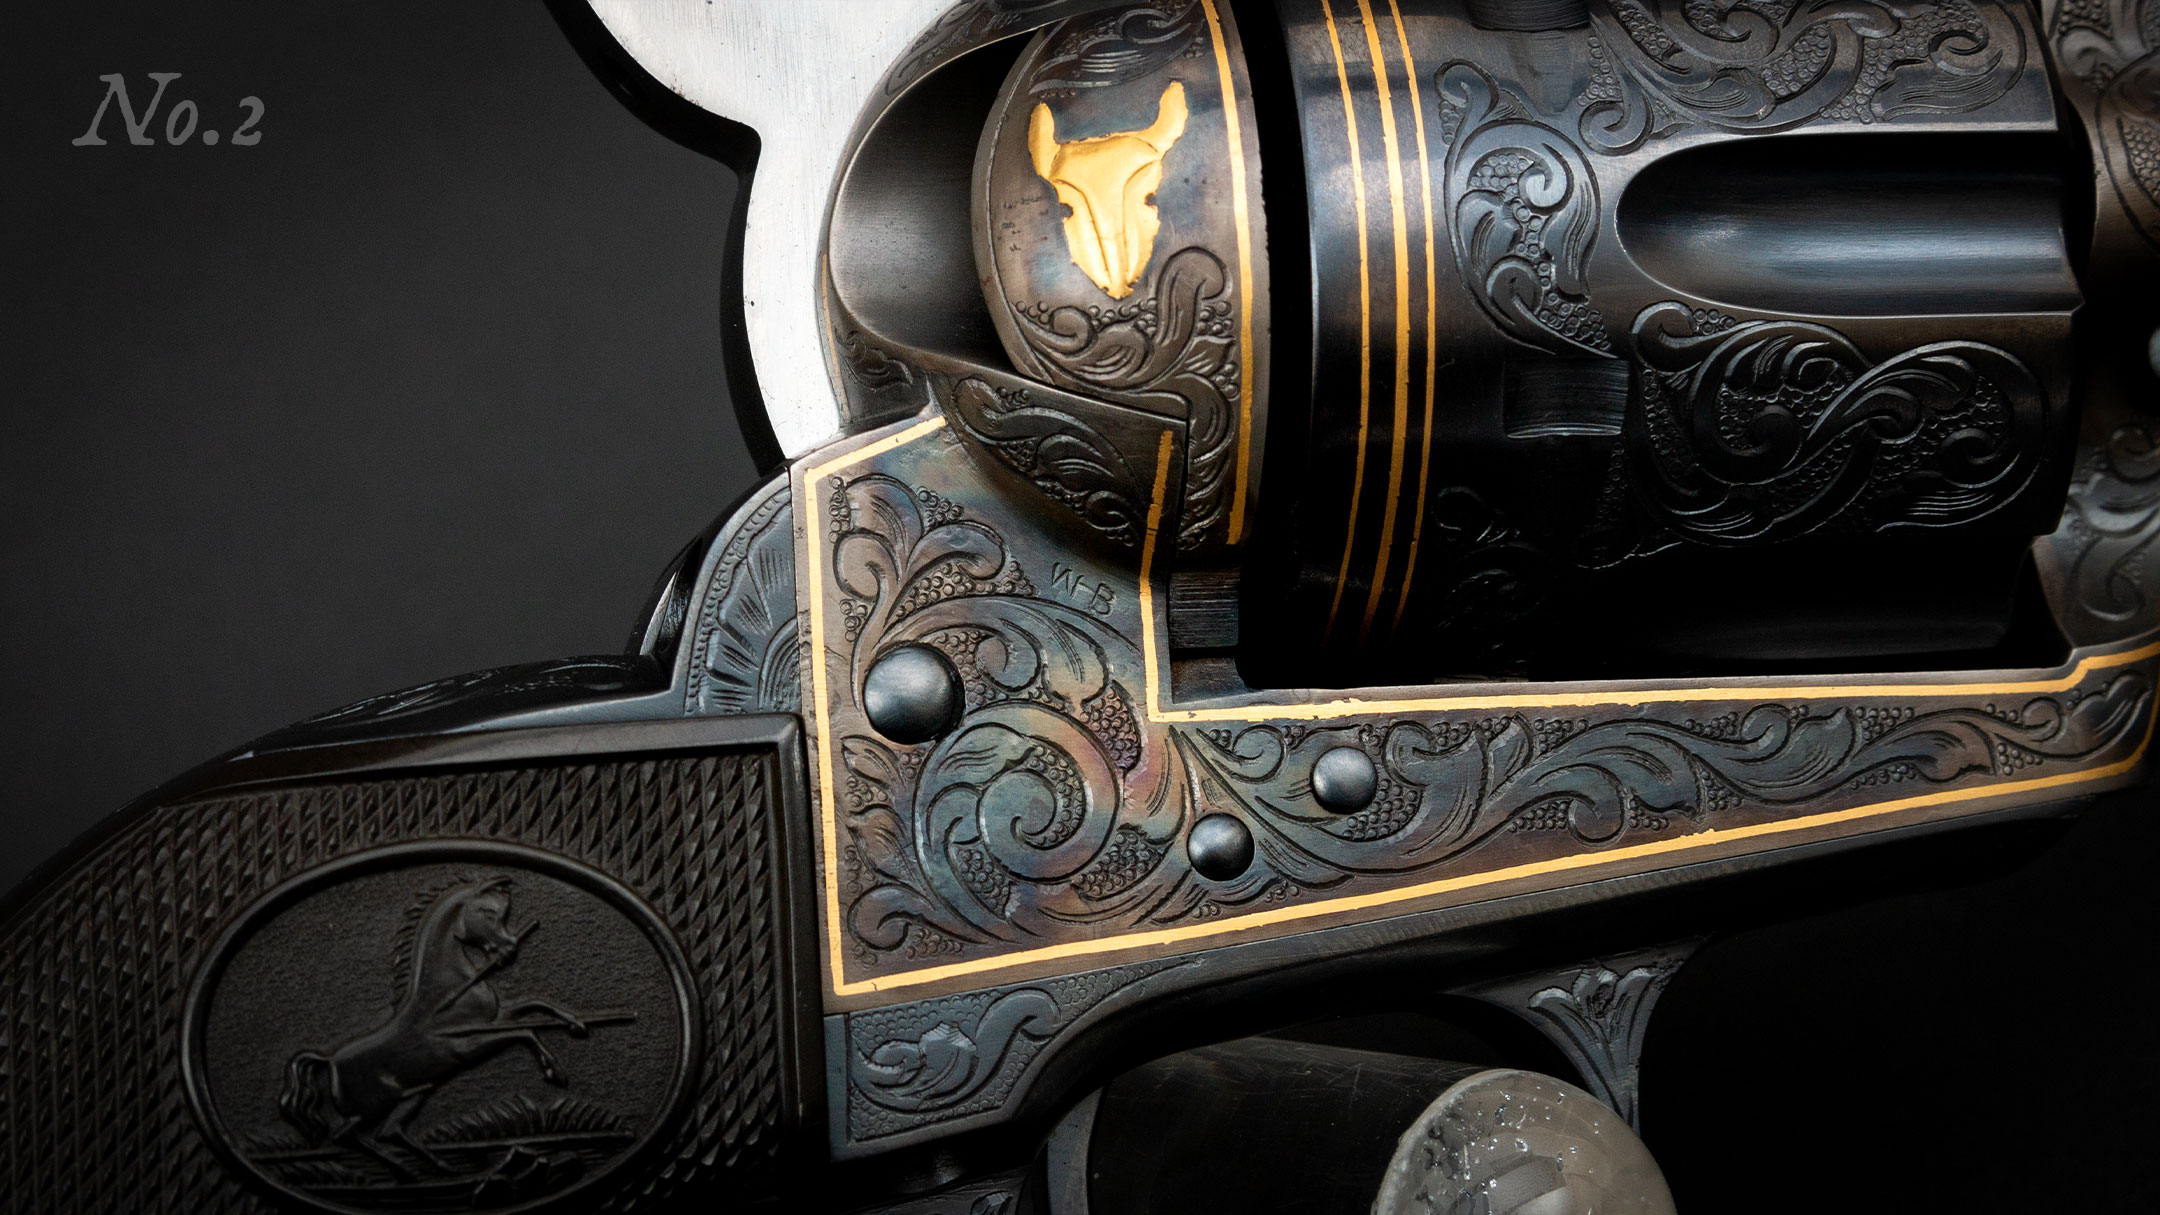 Second of a consecutive-numbered pair of 2nd Generation, Bledsoe-engraved, Colt Single Action Army revolvers, restored and for sale by Turnbull Restoration of Bloomfield, NY